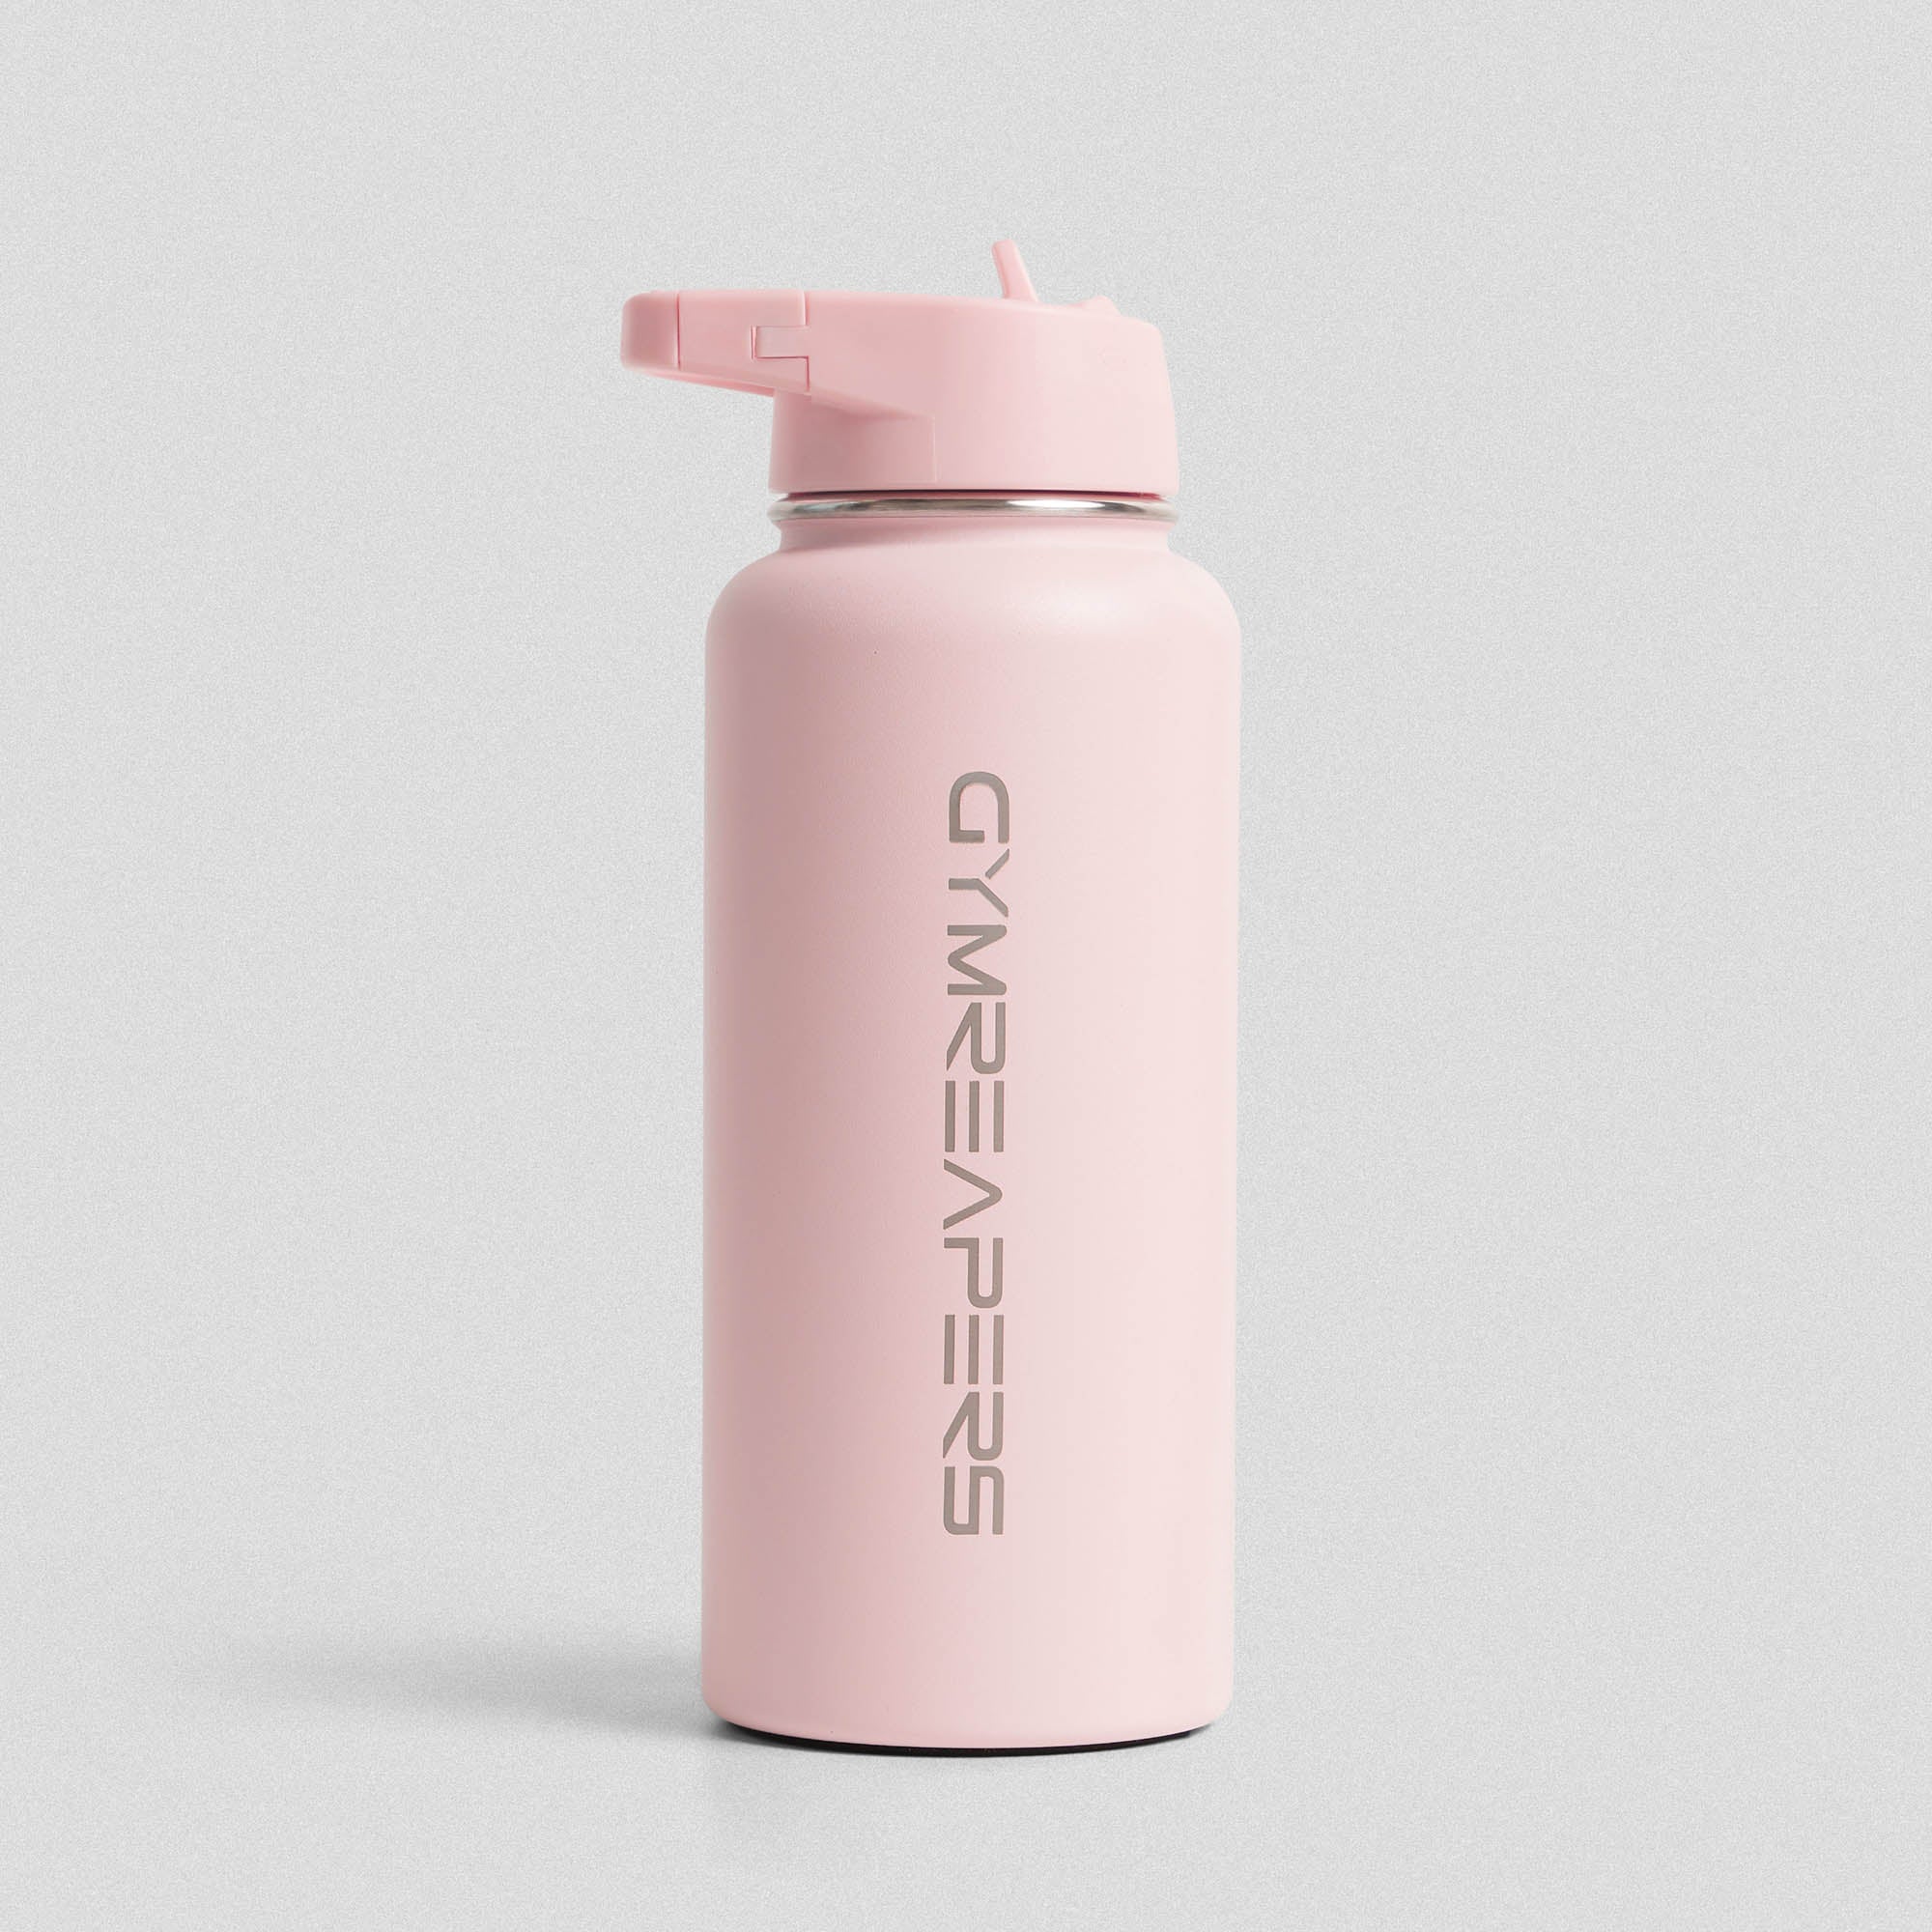 pink 32 oz bottle stand alone